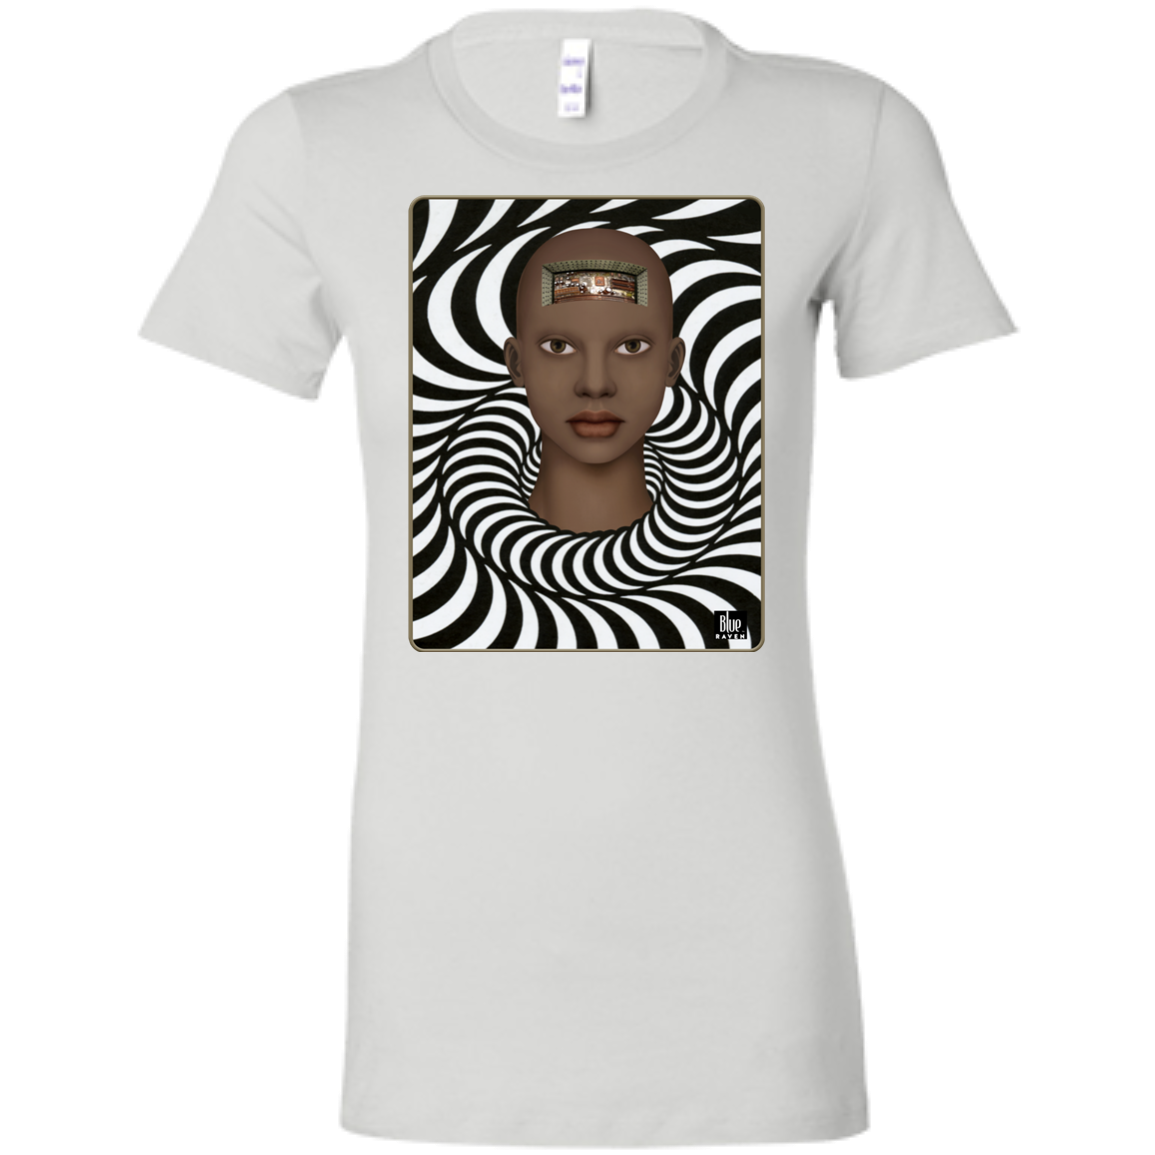 COMPUTERIZED IV - Women's Fitted T-Shirt